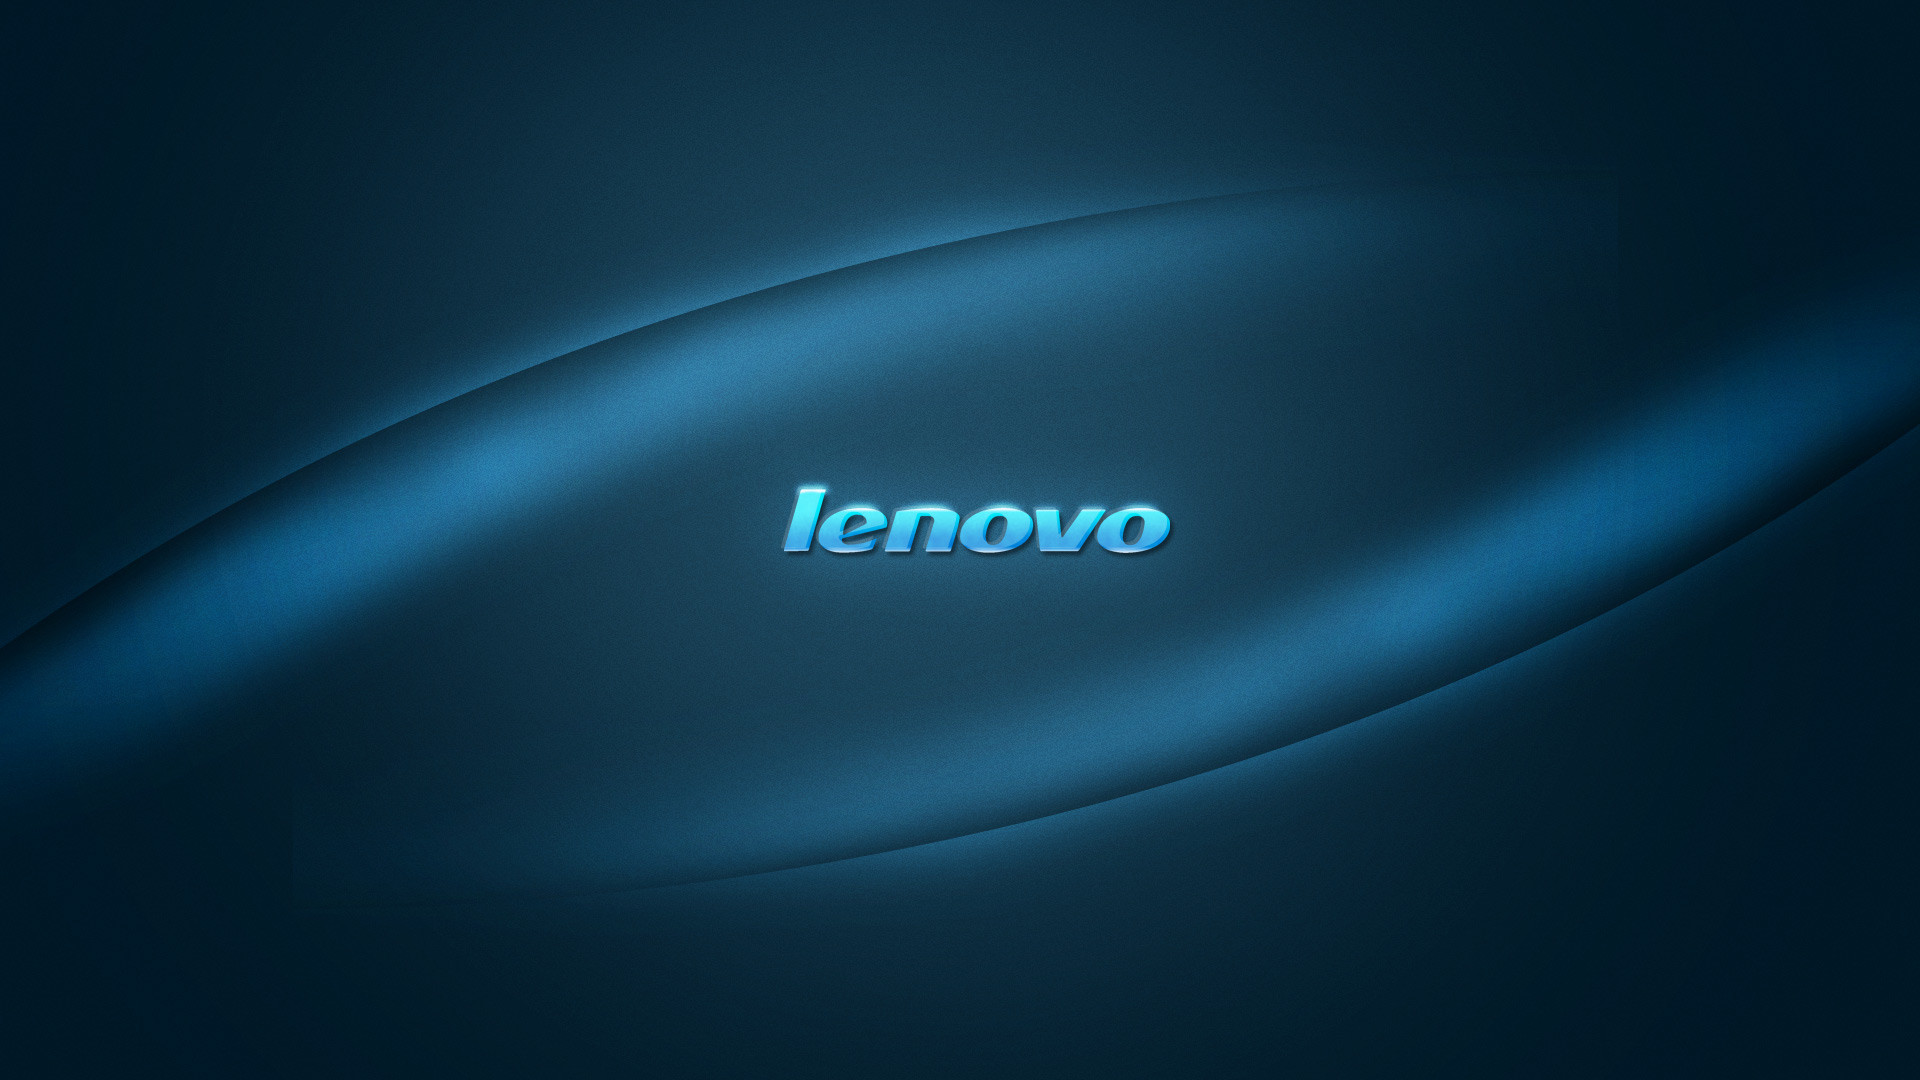 2880x1620 lenovo wallpaper for computer - Coolwallpapers.me!